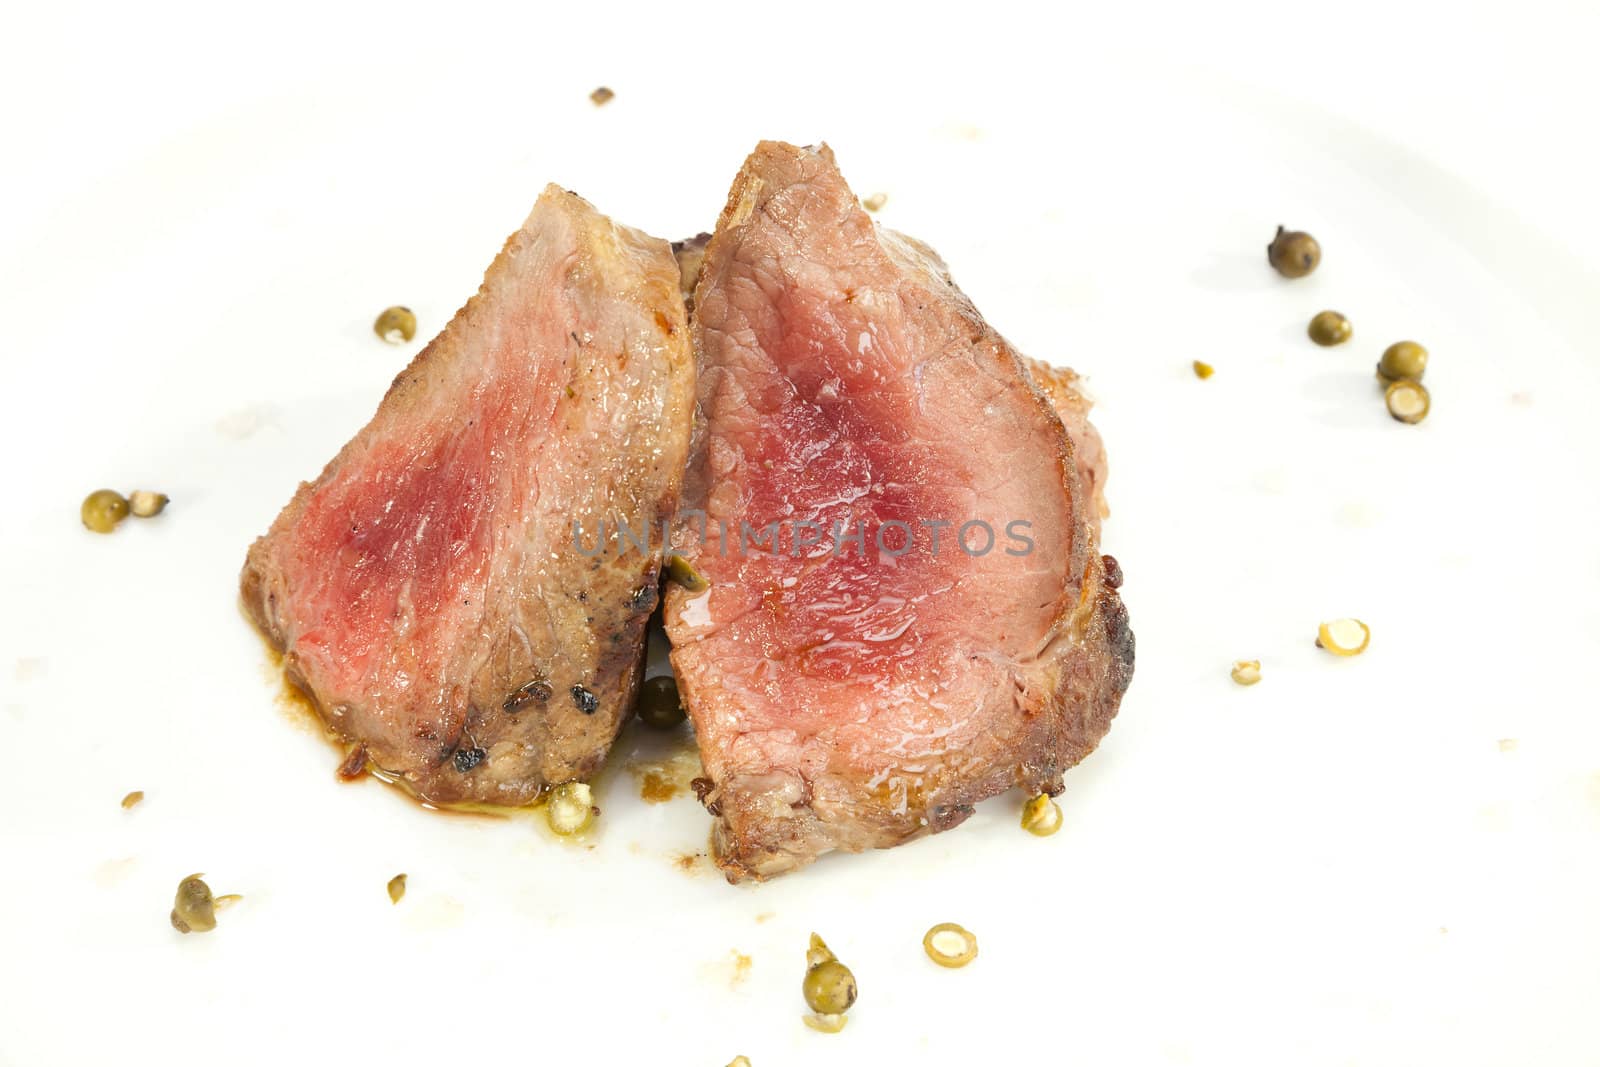 Grilled Sirloin with green pepper by hanusst